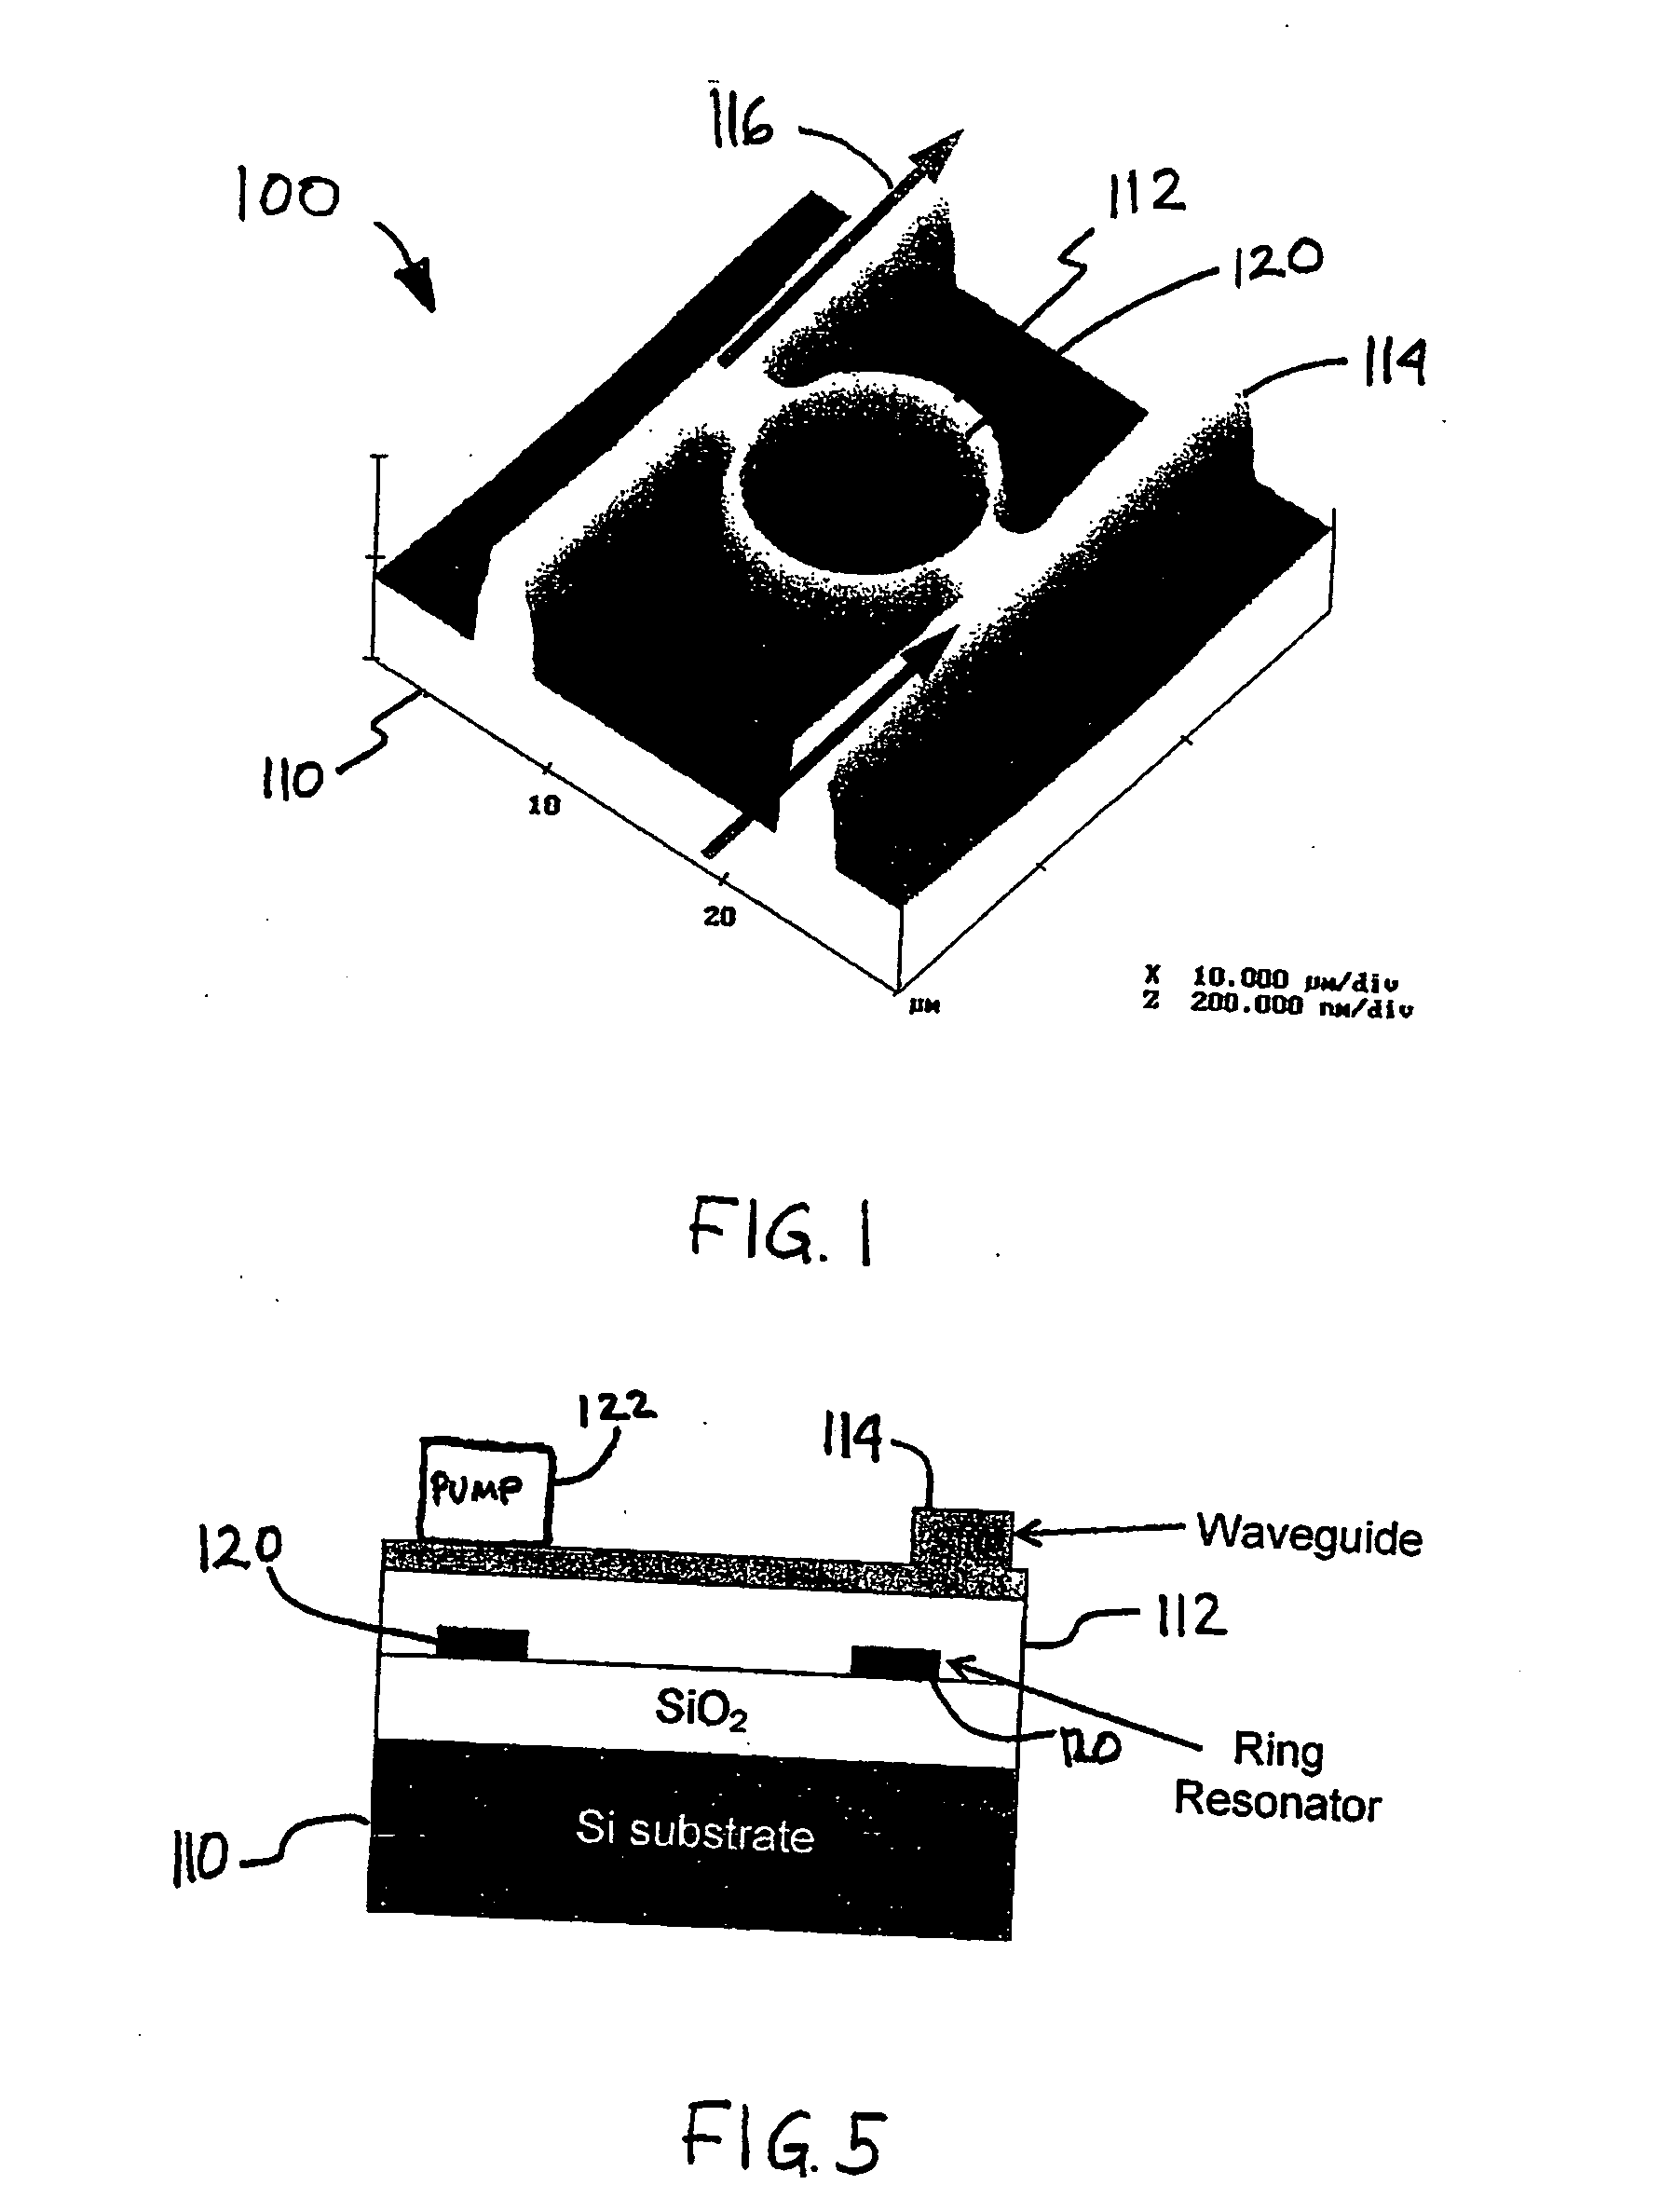 Microring and microdisk resonators for lasers fabricated on silicon wafers